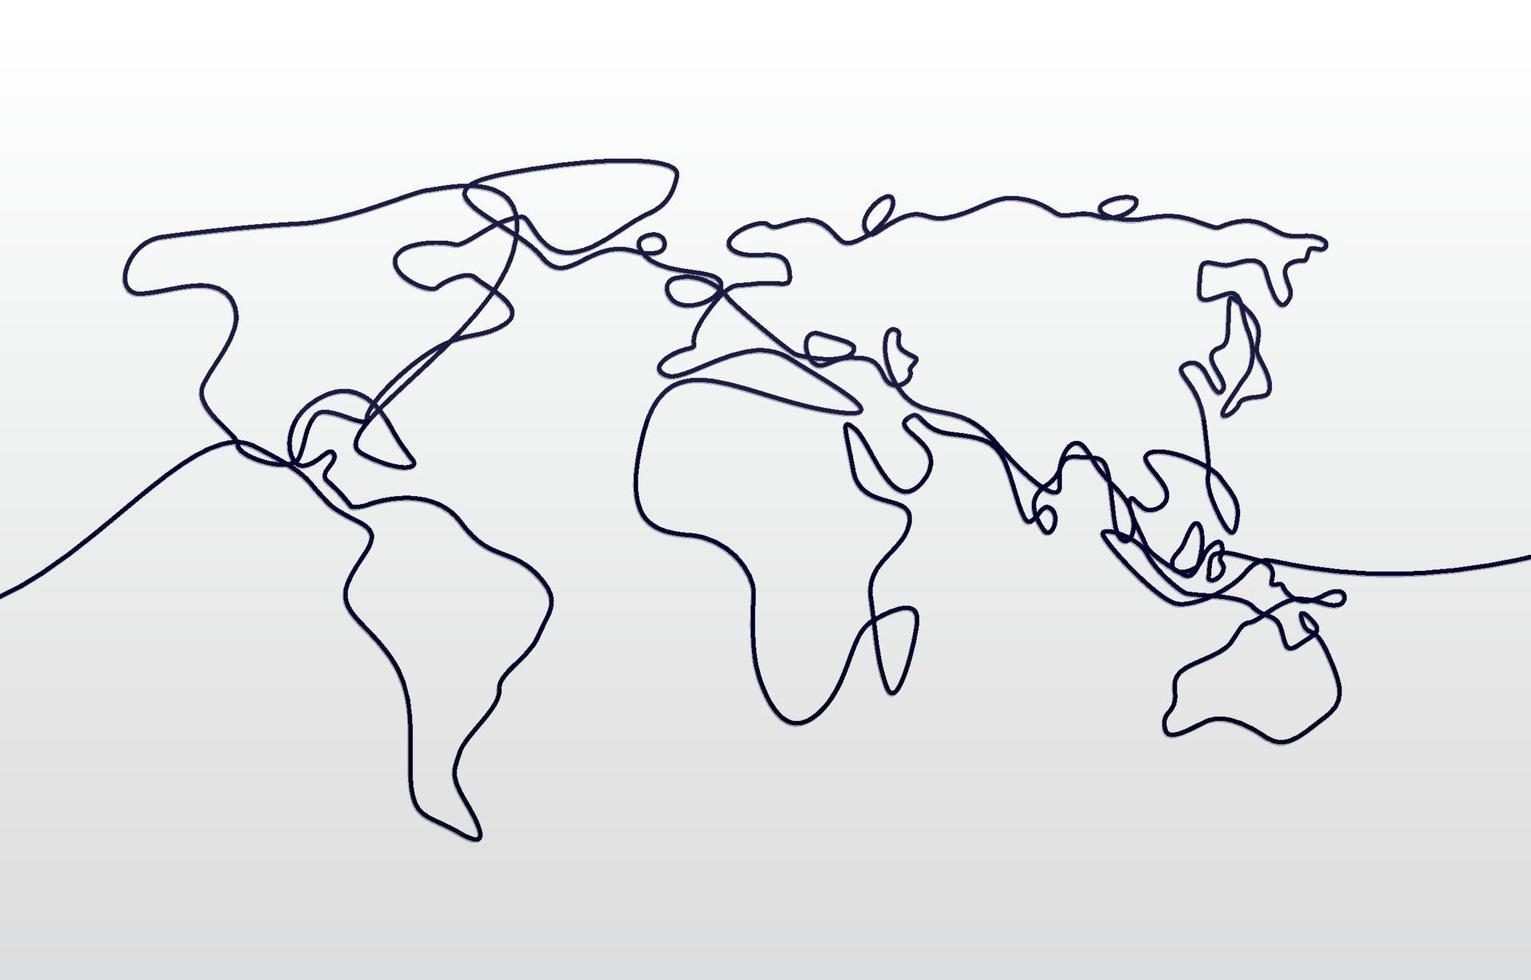 World Map in One Line Art Style vector